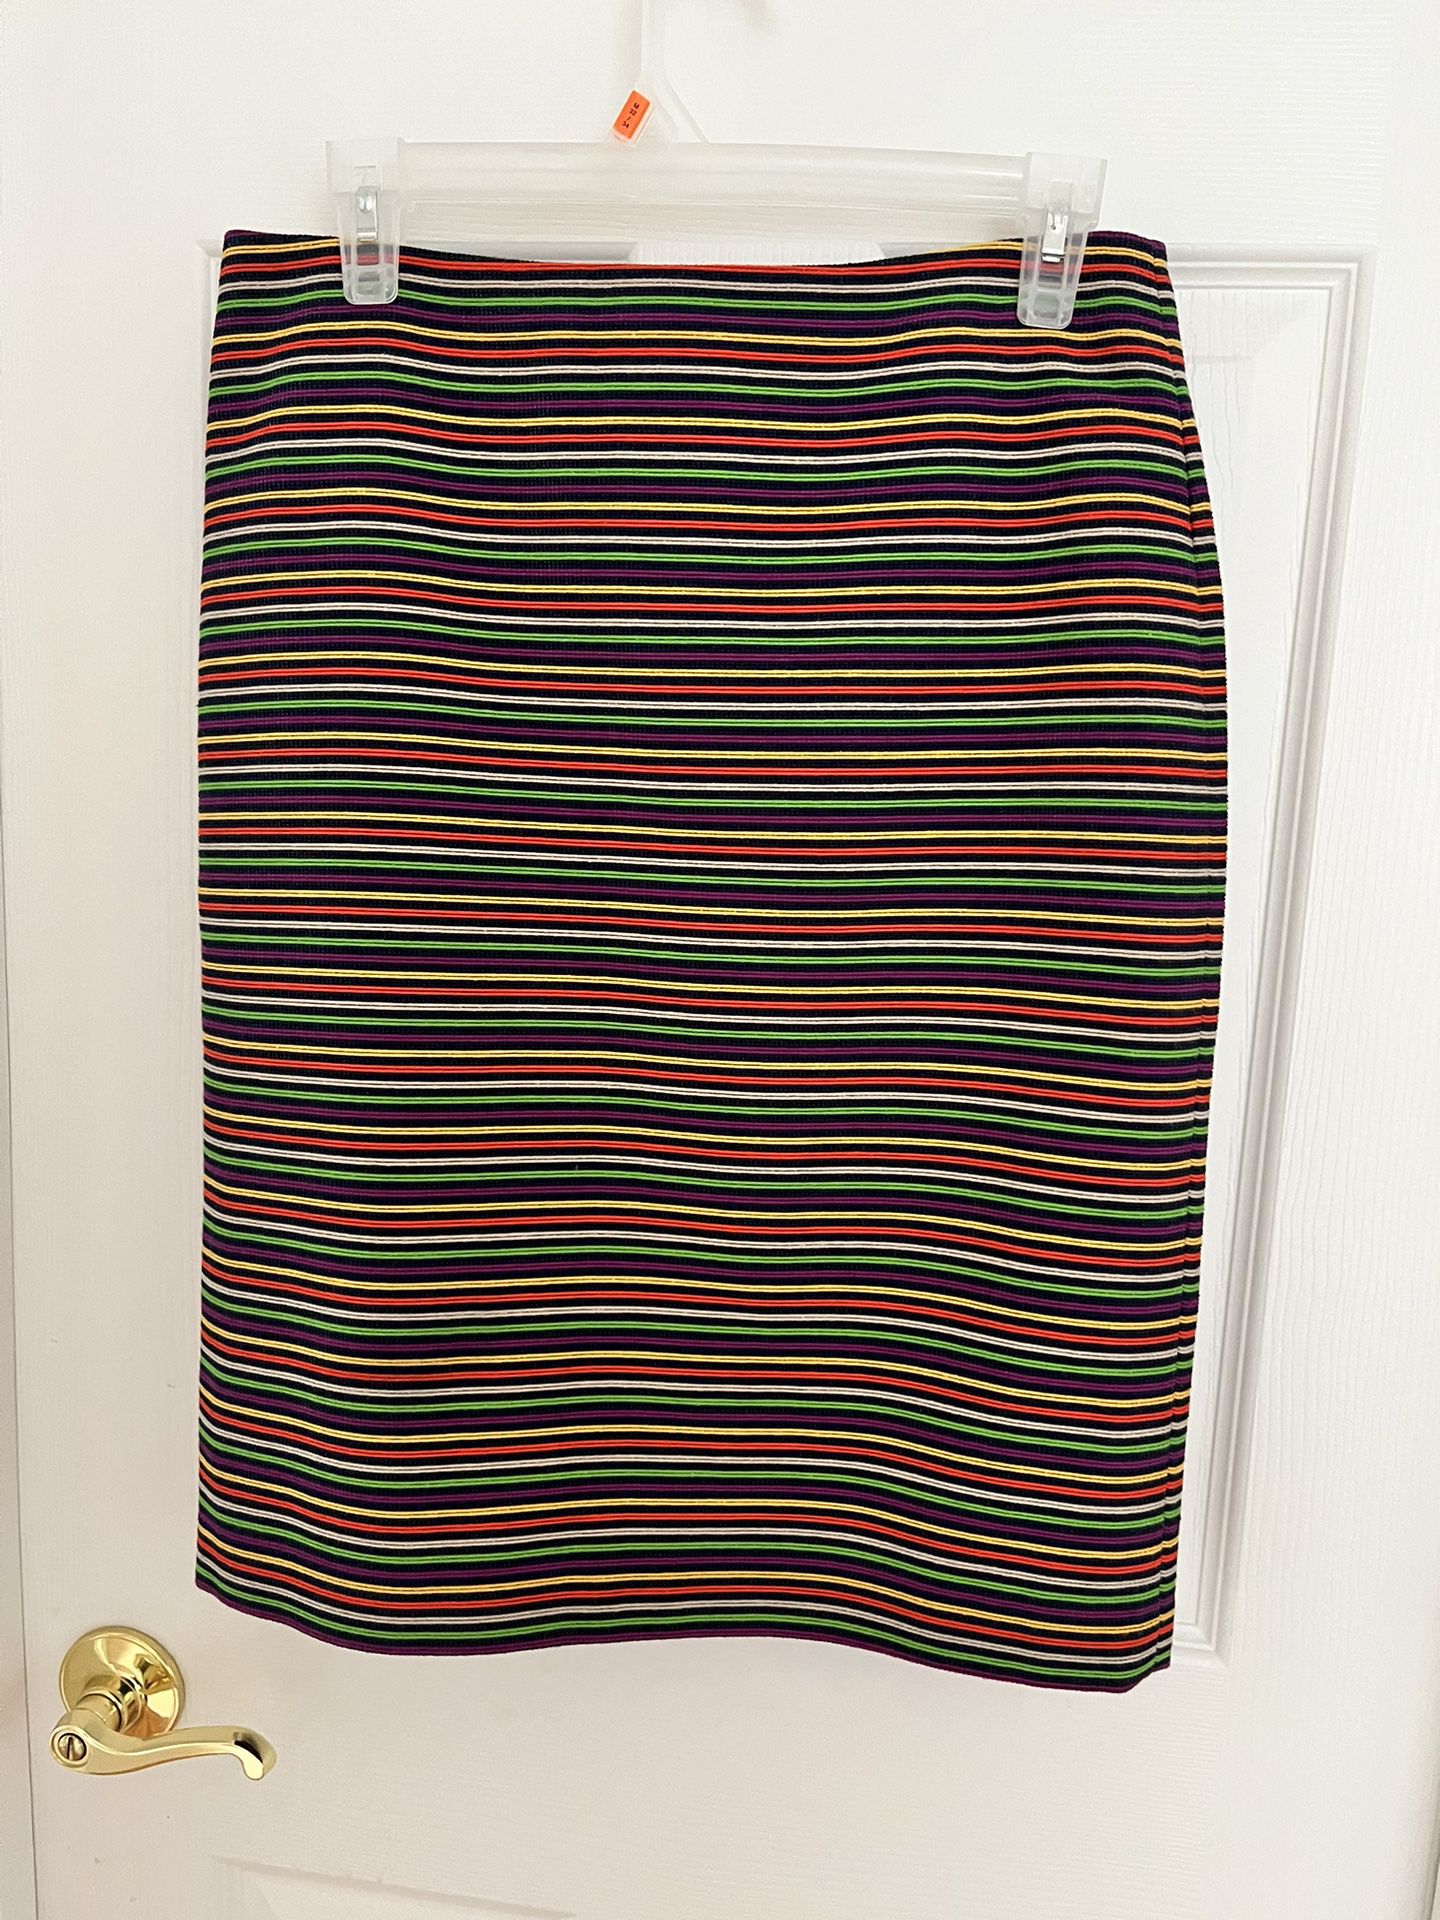 Talbots Lined Striped Multicolor Pencil Skirt Size 6